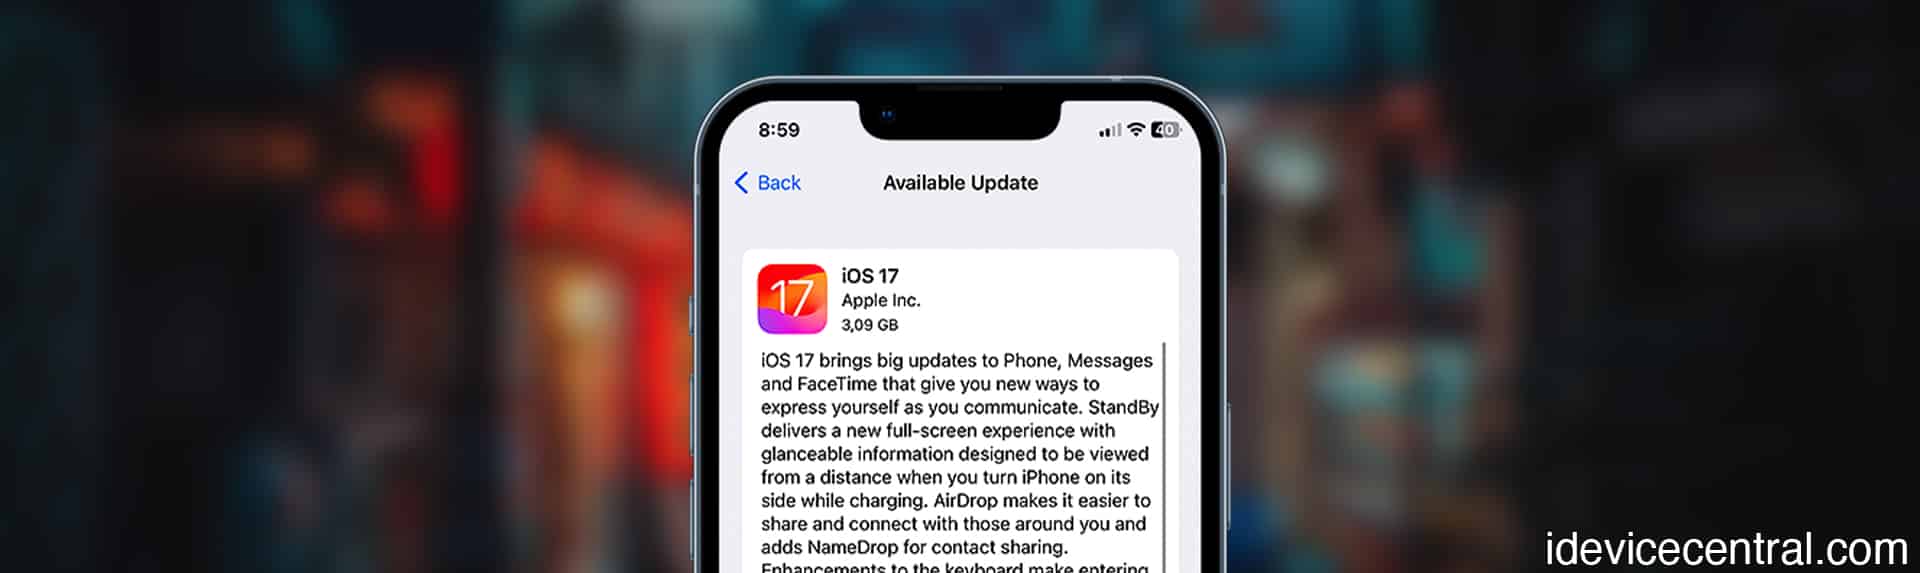 iOS 17.0 was officially RELEASED! Apple releases iOS 17 along with iPhone 15 and some amazing changes!